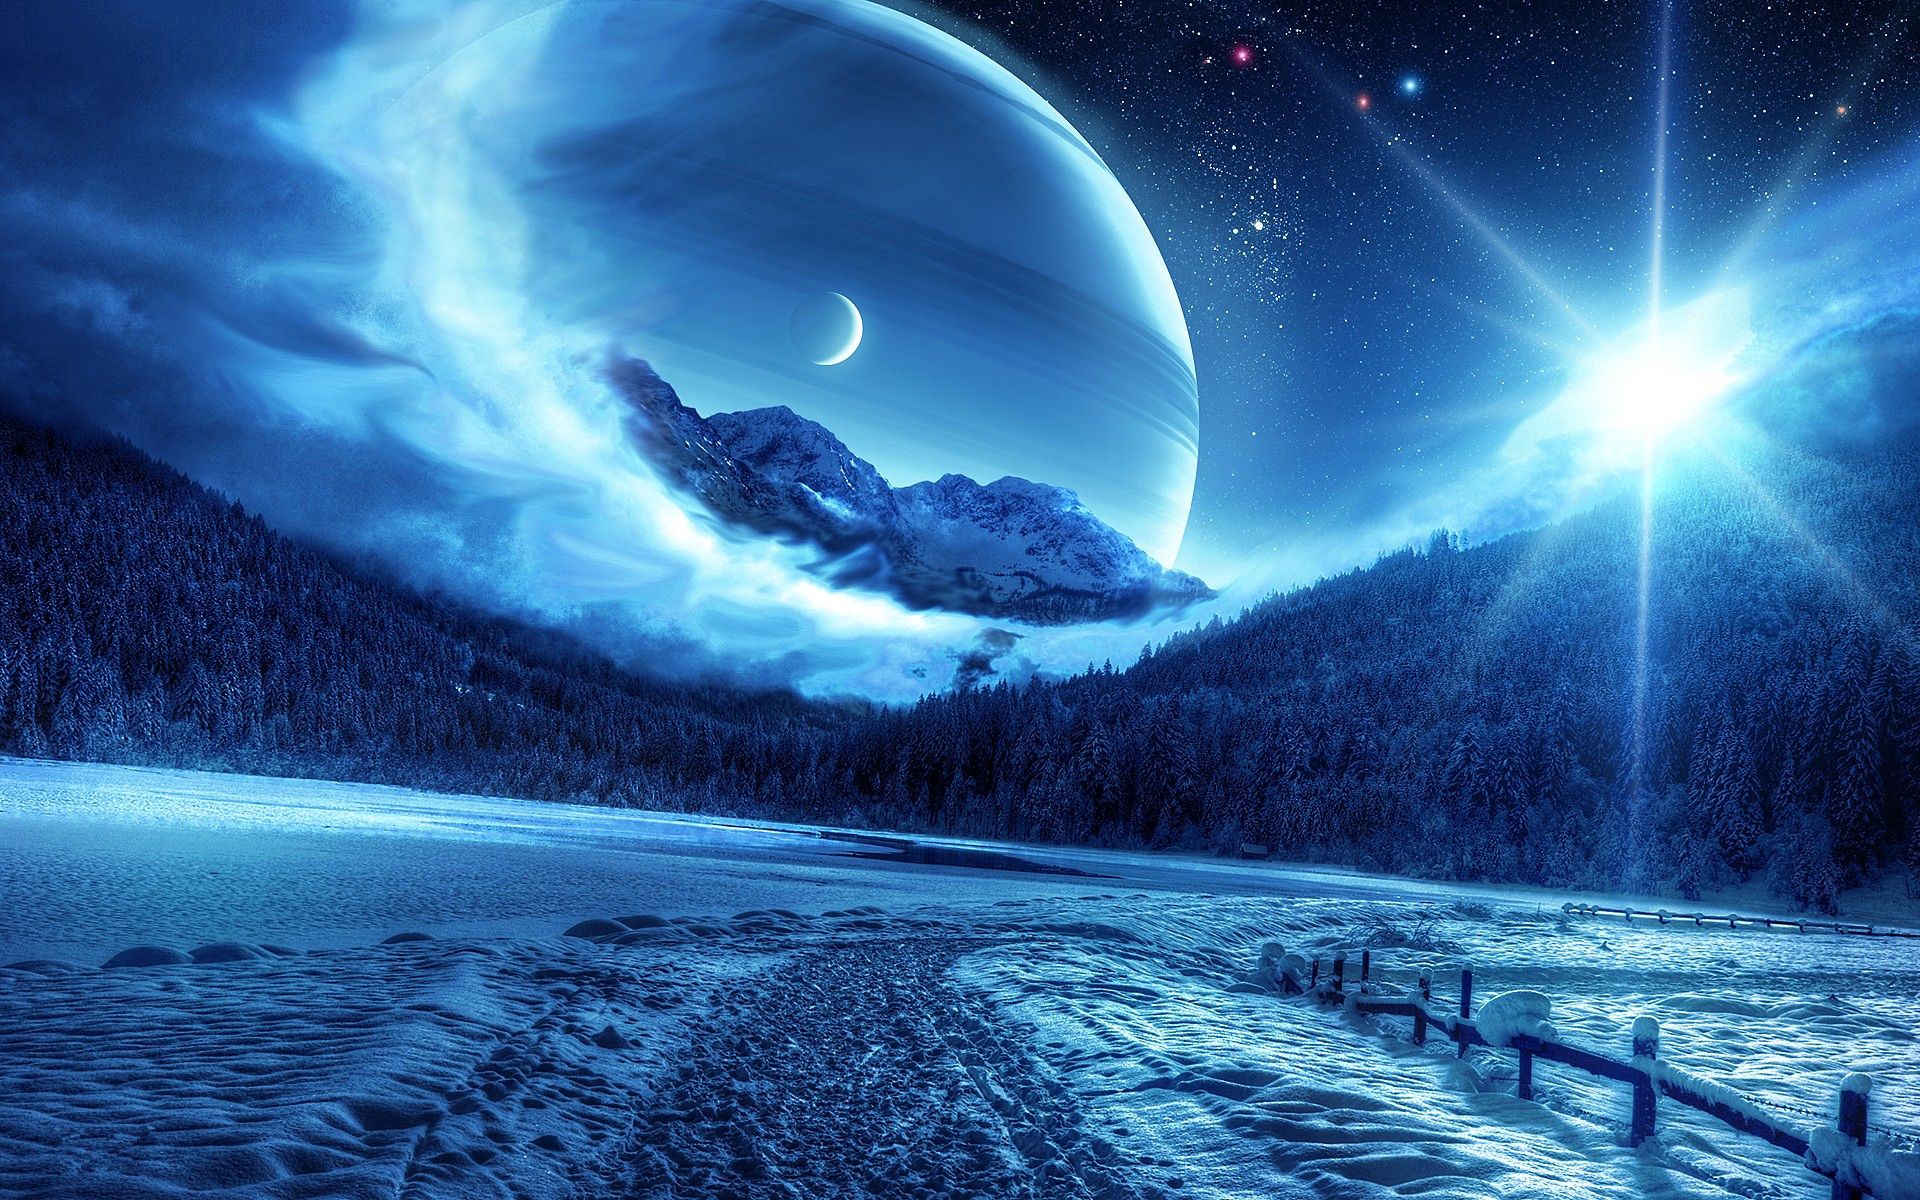 Free HD winter, planets, nature, mountains, night, road, fantastic landscape